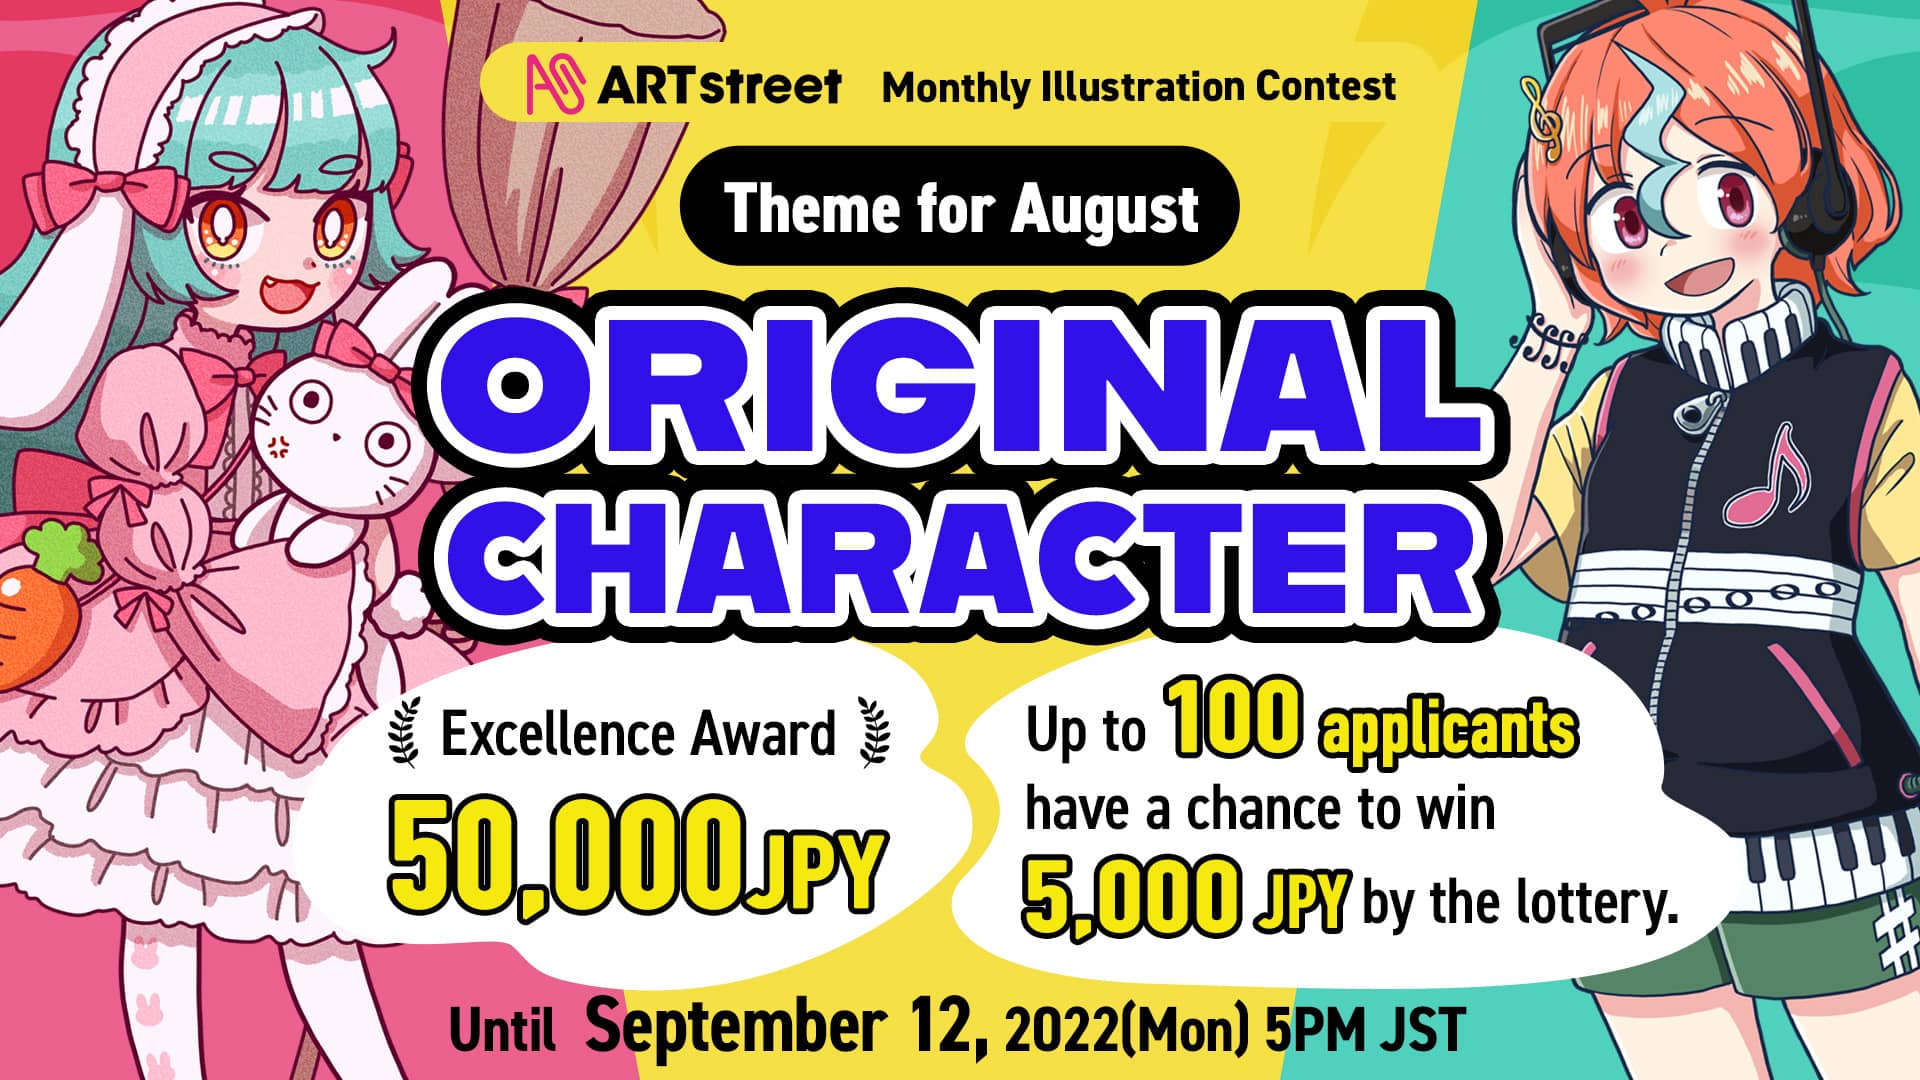 ART street Monthly Illustration Contest Theme for August: Original Character